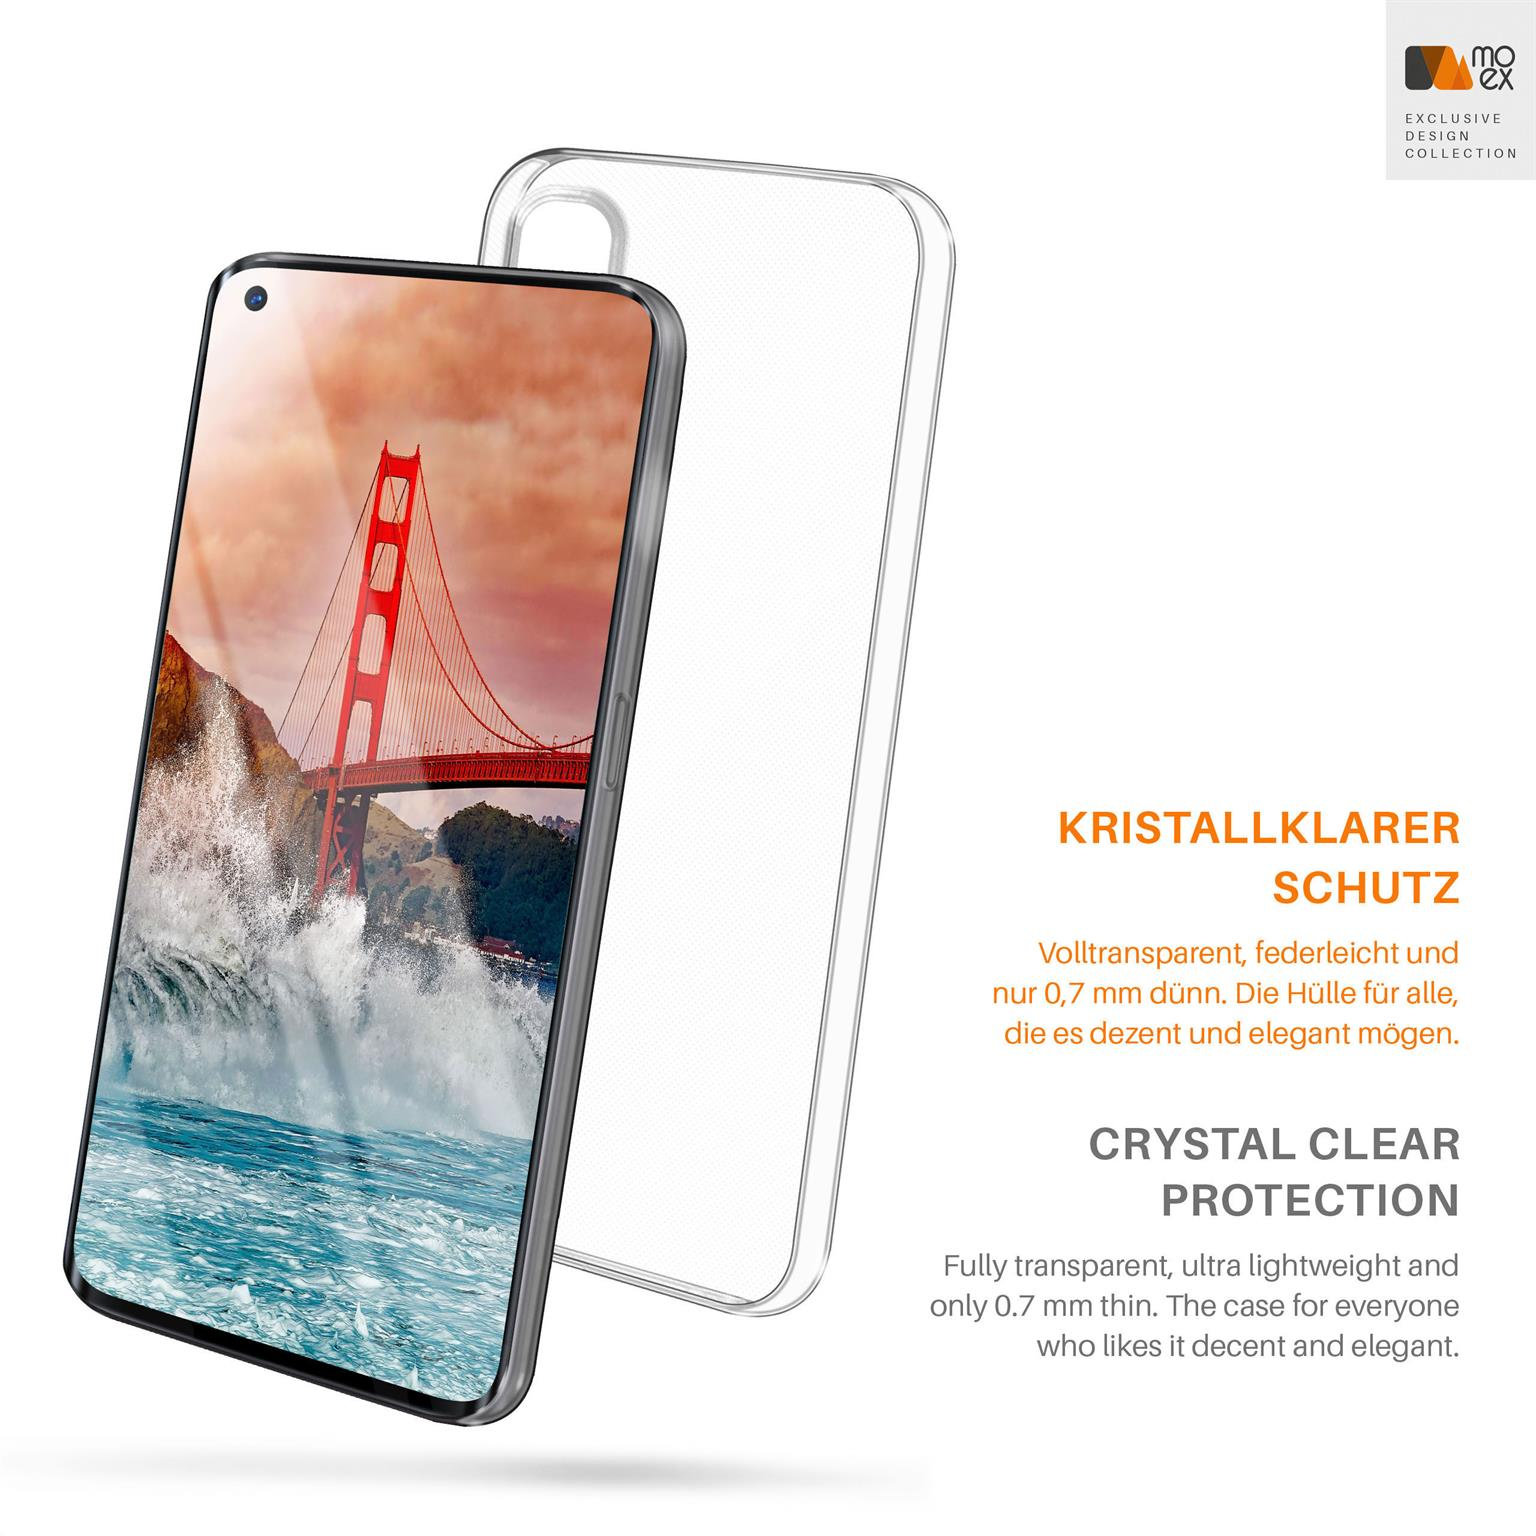 MOEX Aero Case, Backcover, Crystal-Clear Oppo, Neo, Find X2